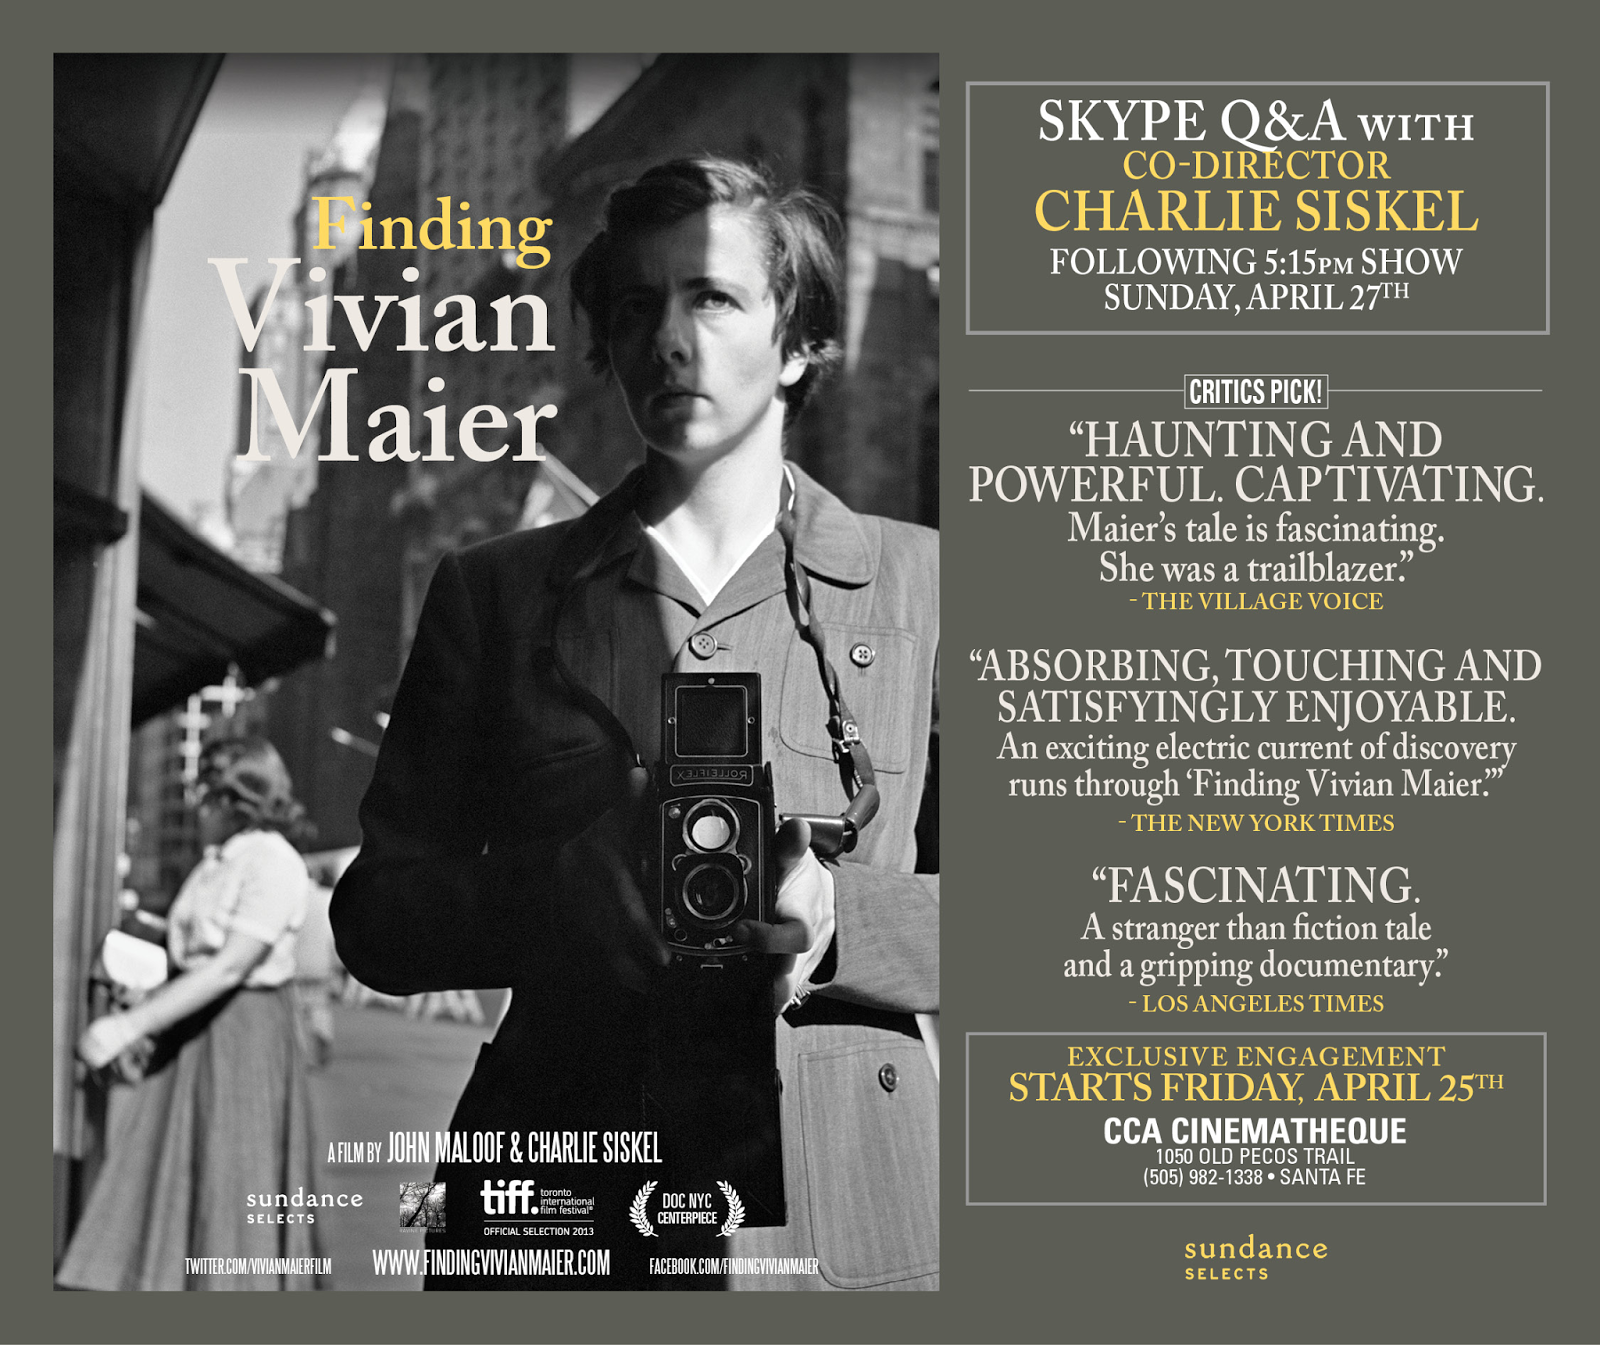 Image #1 for Finding Vivian Maier screening at Cinematheque in Santa Fe